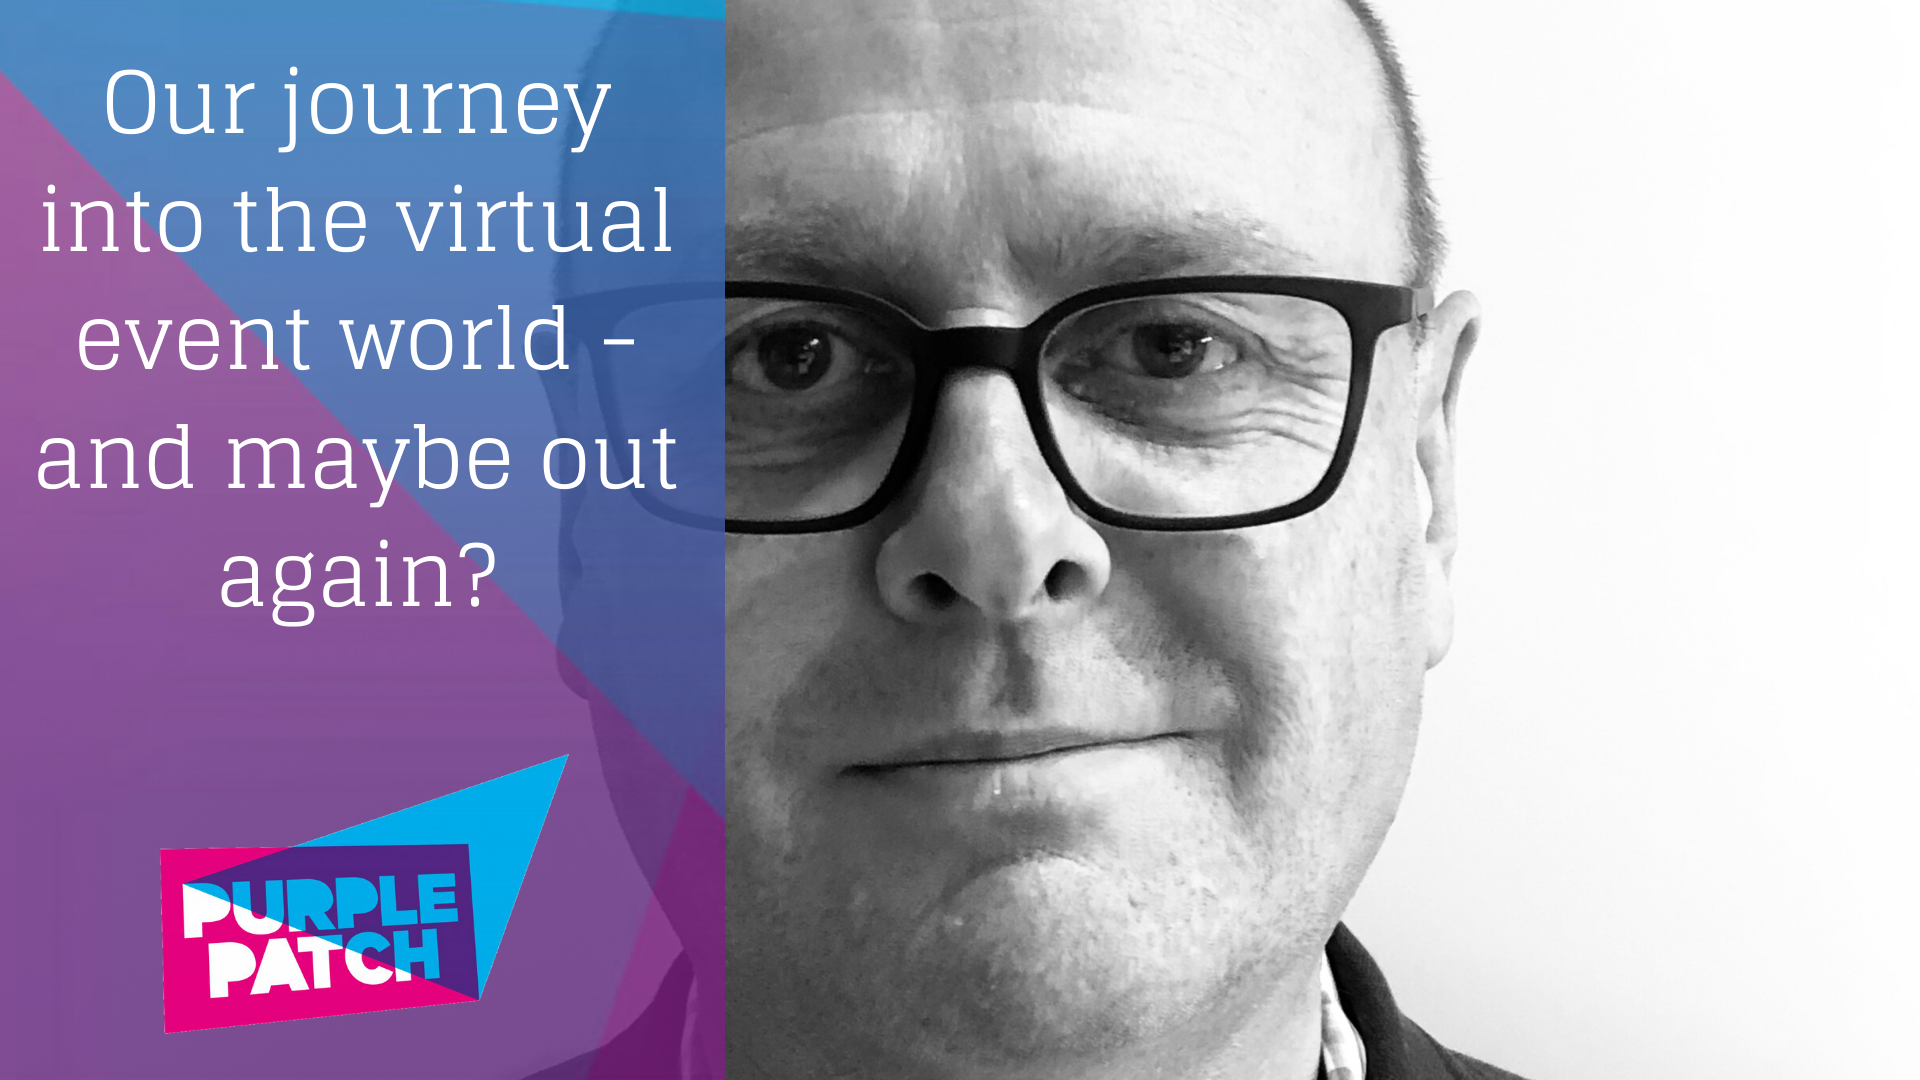 Our journey into the virtual event world - and maybe out again?